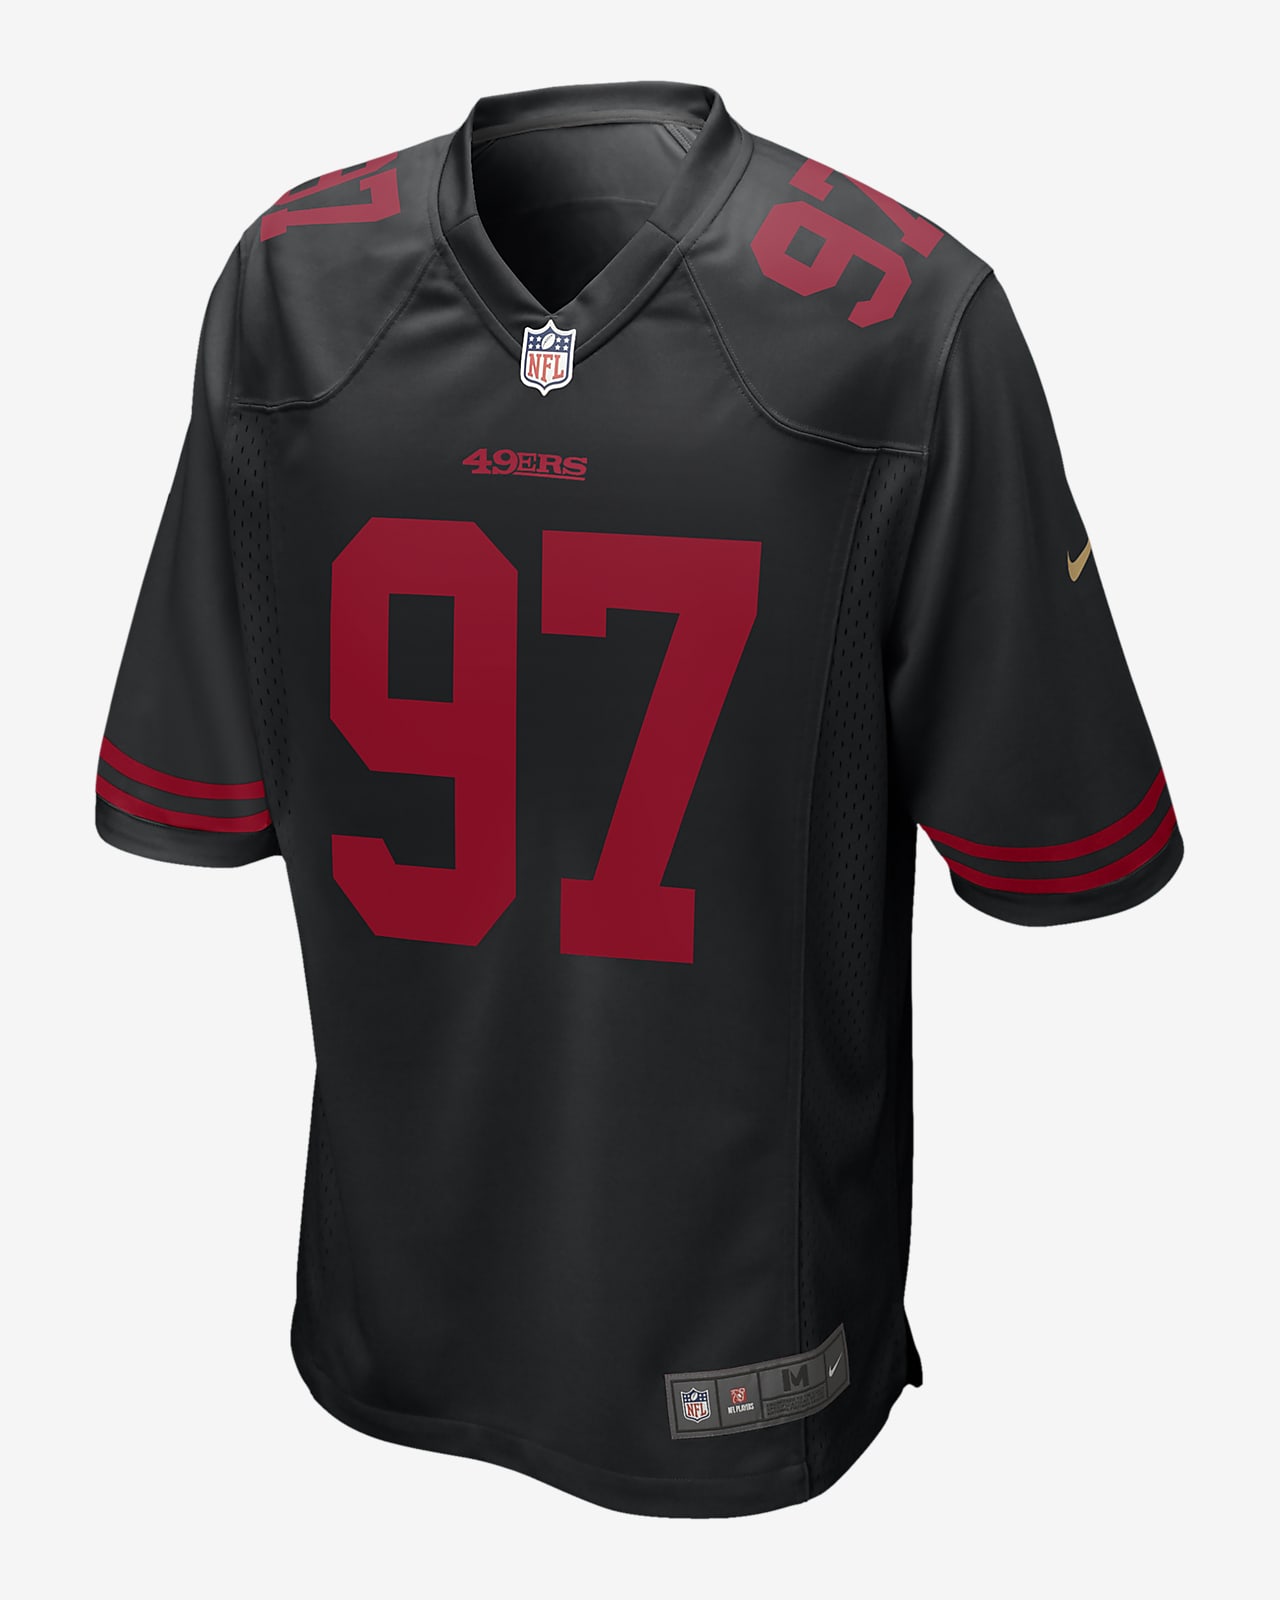 buy san francisco 49ers jersey, OFF 70%,Cheap price!